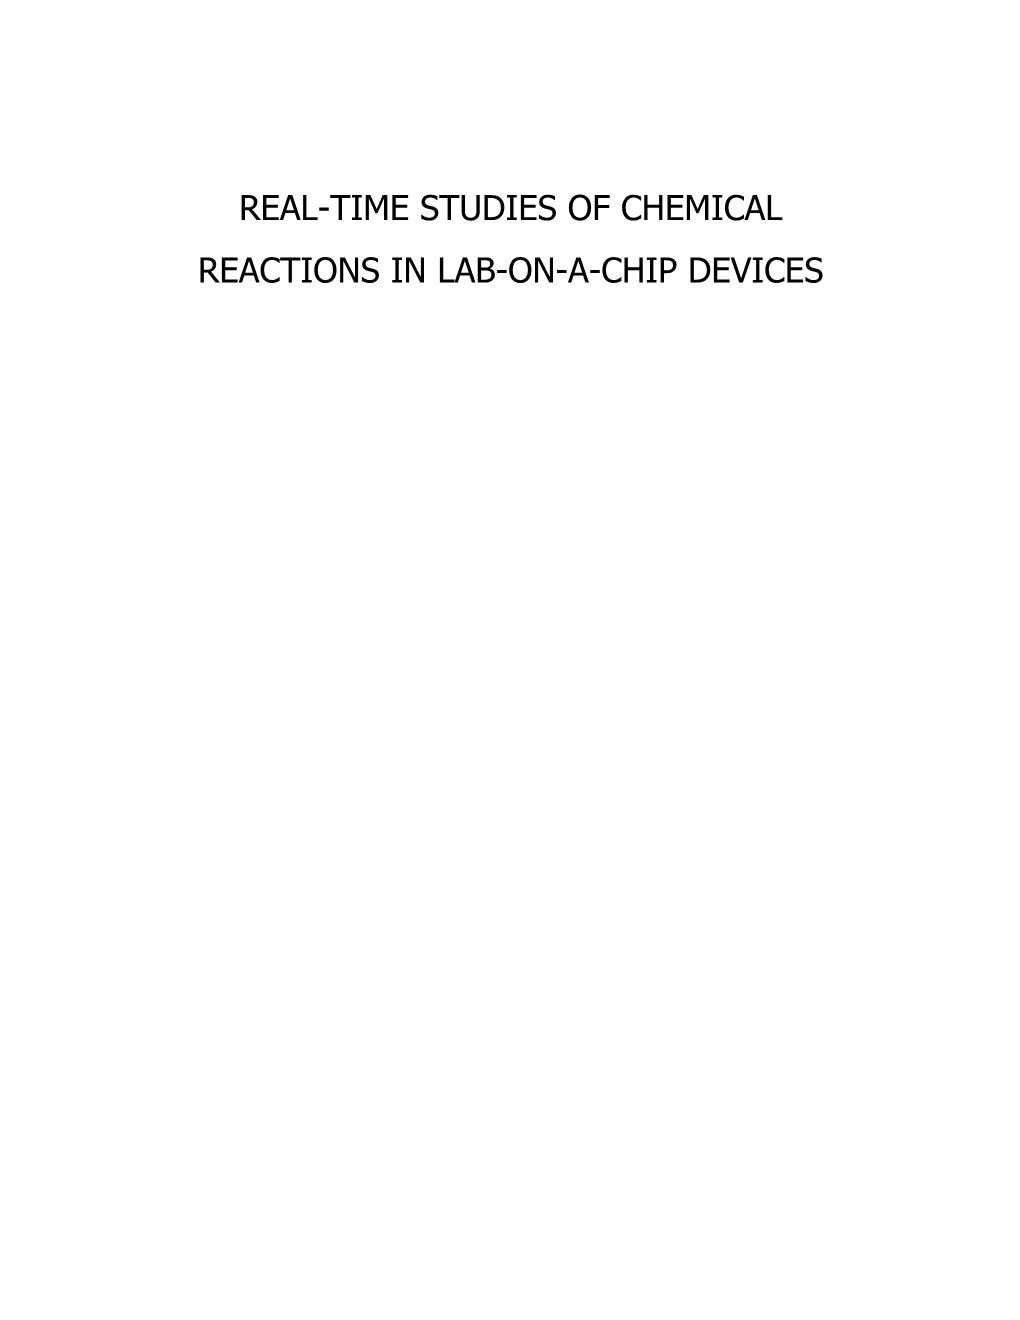 REAL-TIME STUDIES of CHEMICAL REACTIONS in LAB-ON-A-CHIP DEVICES Real-Time Studies of Chemical Reactions in Lab-On-A-Chip Devices